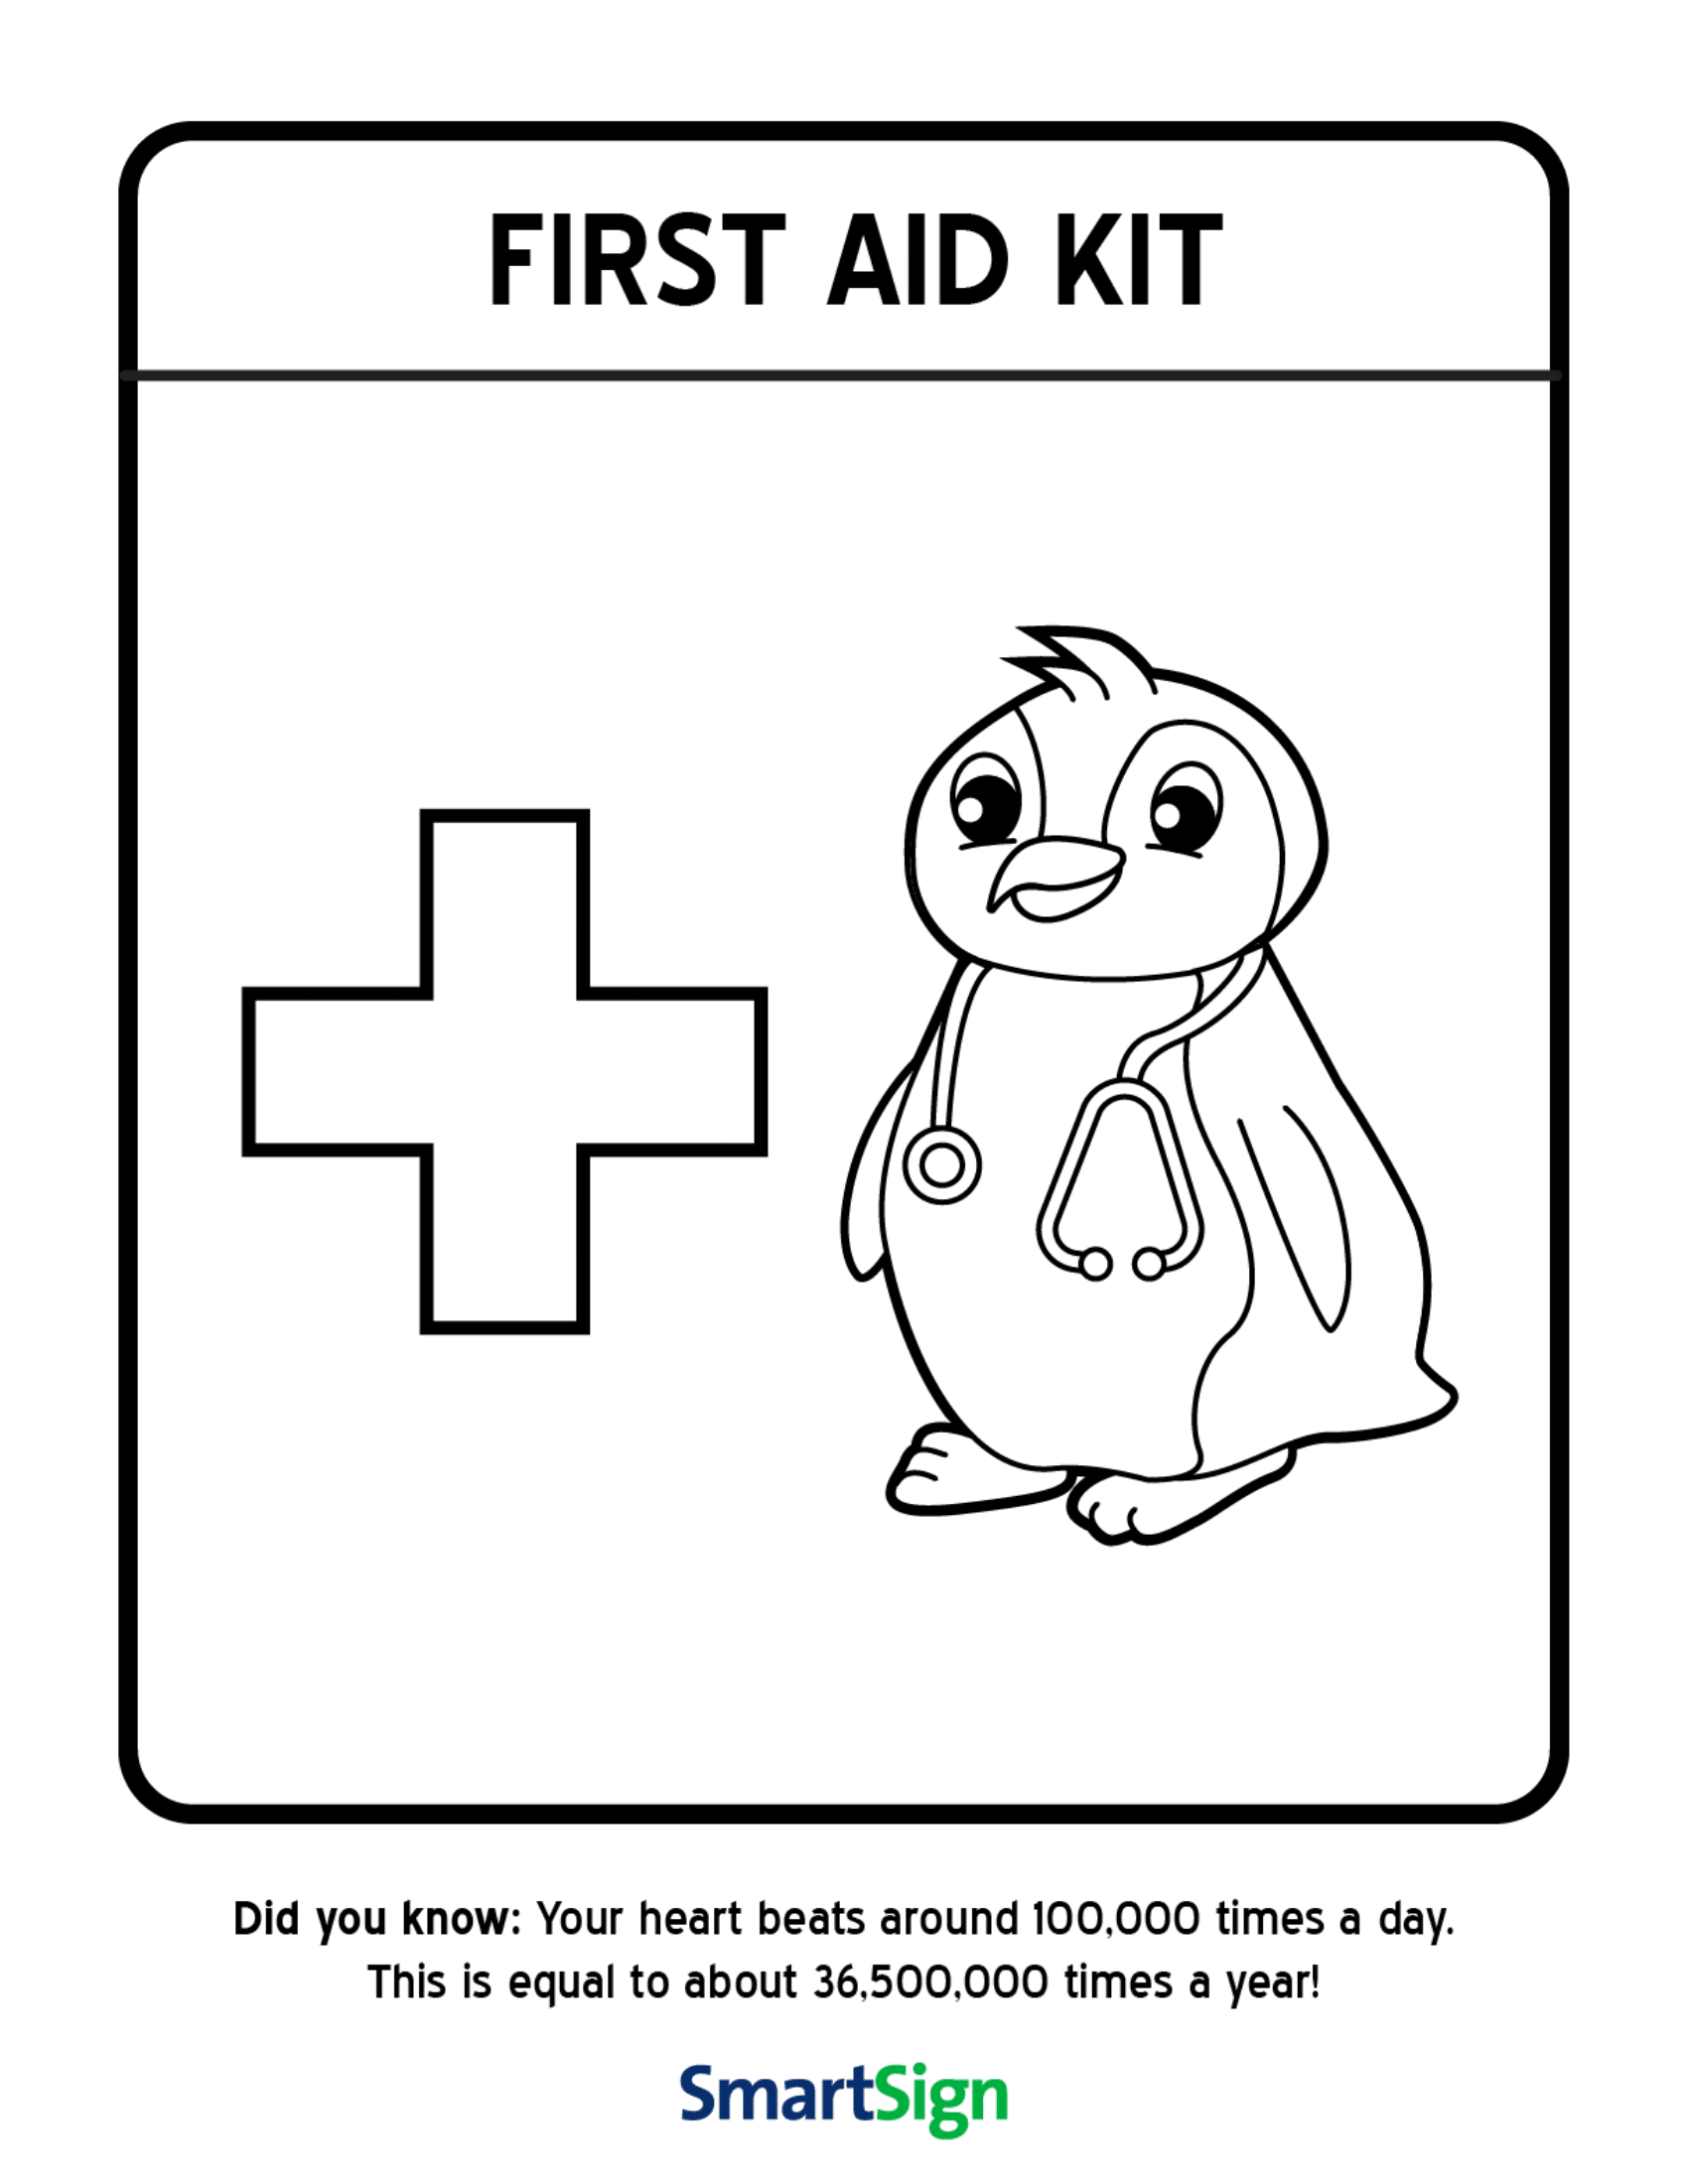 Safety Coloring Printable for Kids - First Aid Kit.